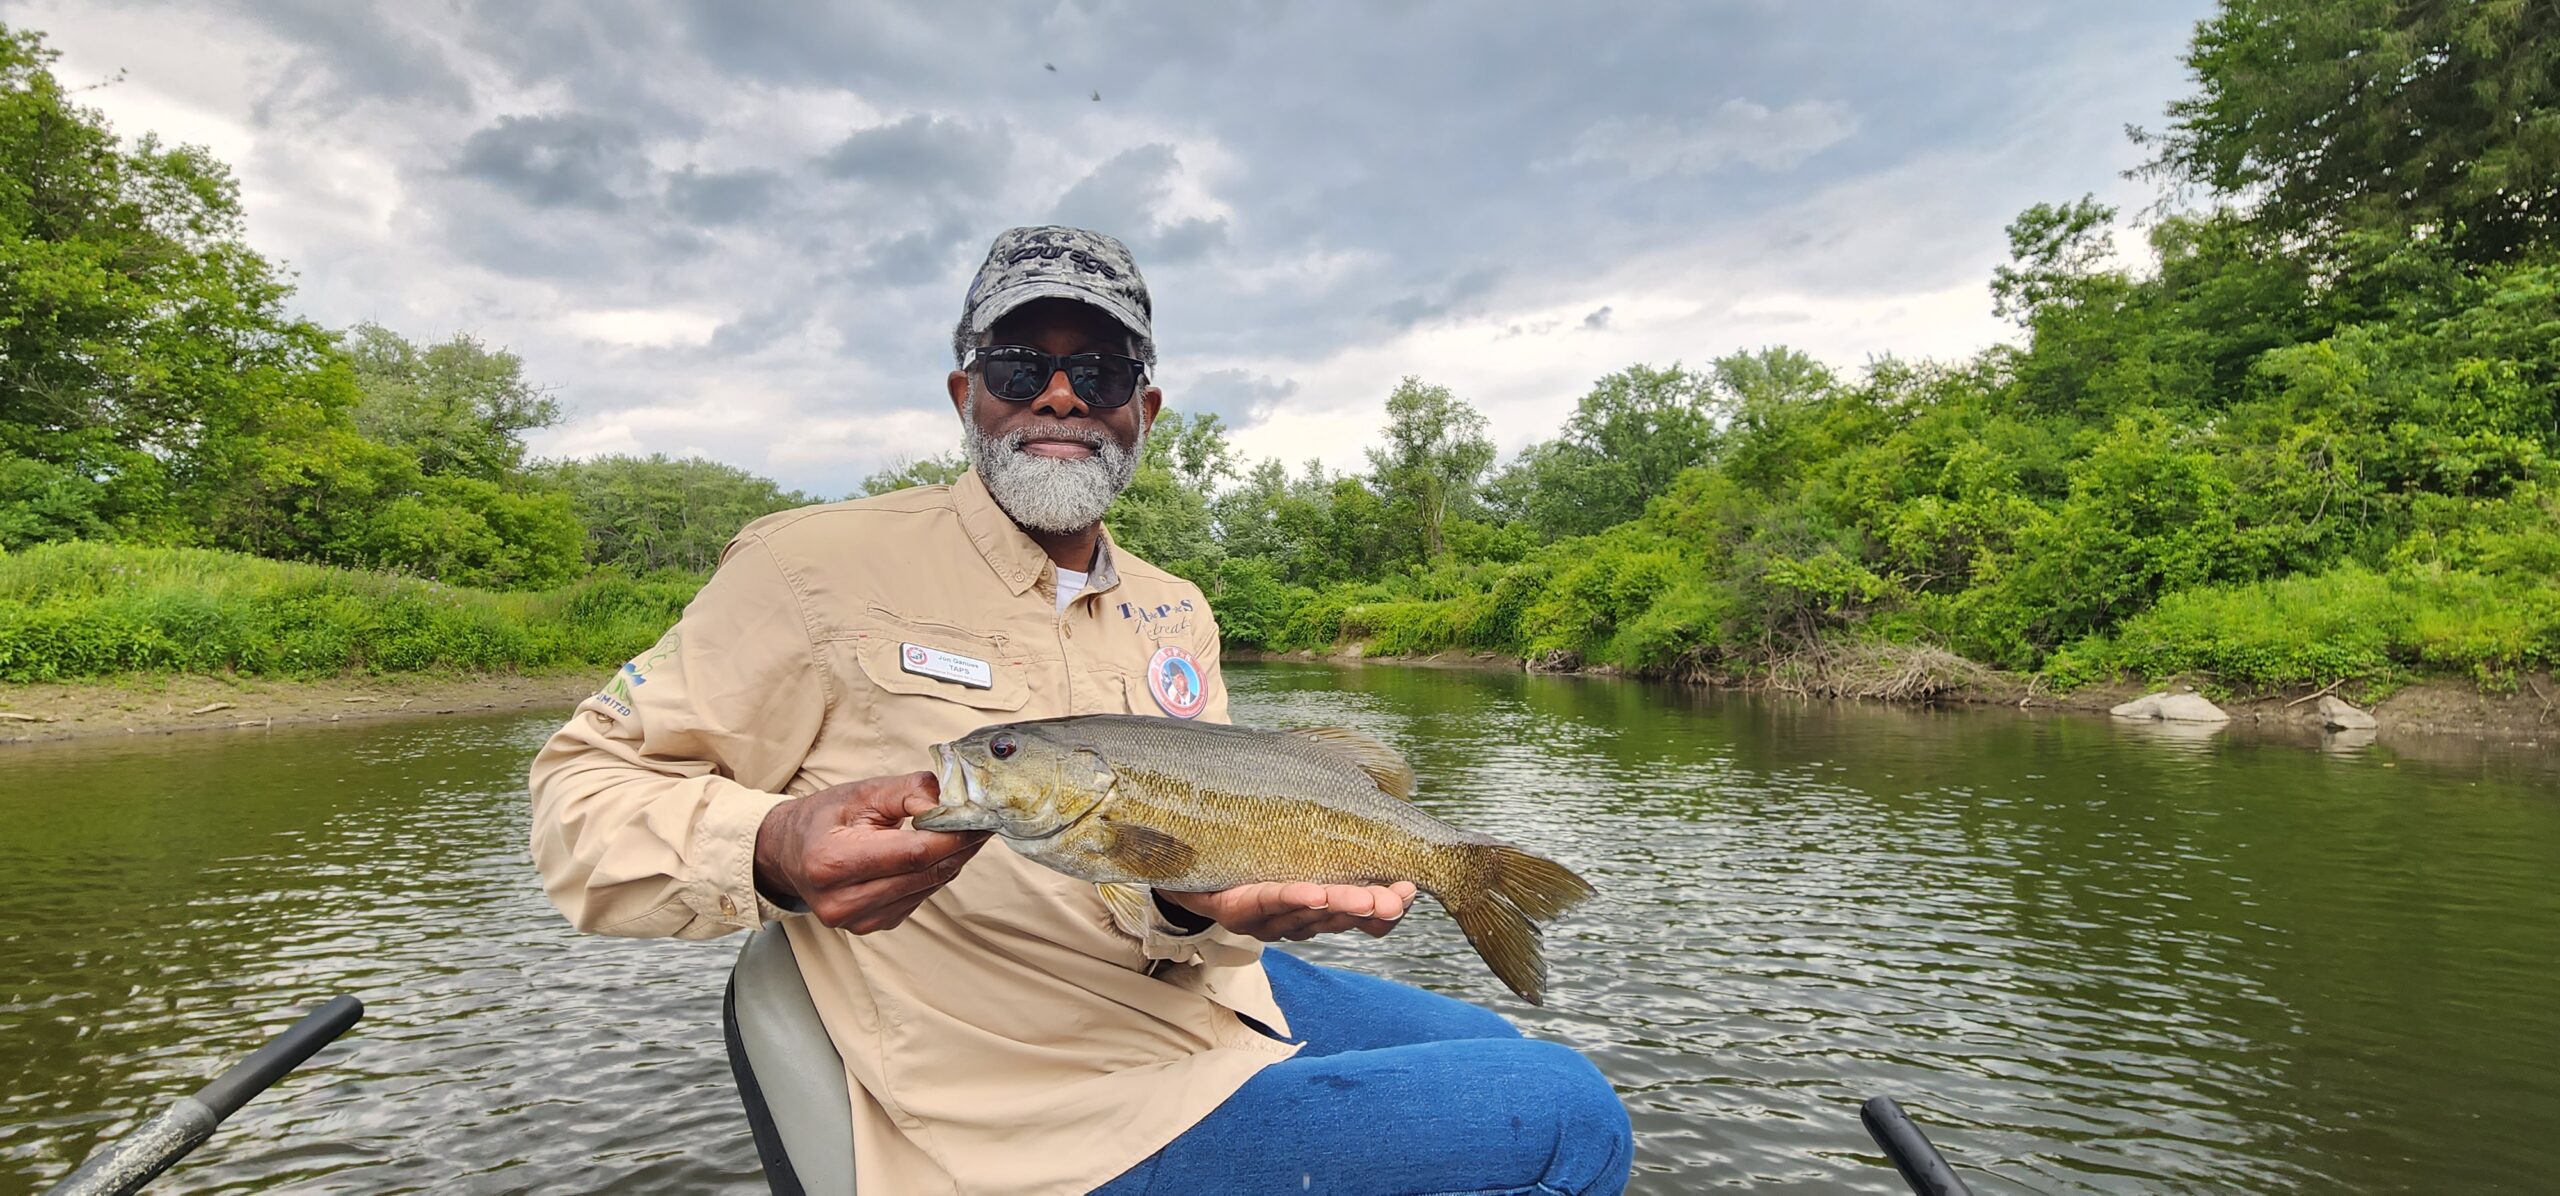 An older Black man with a gray beard sits on a boat cradling a bass to display for the camera.